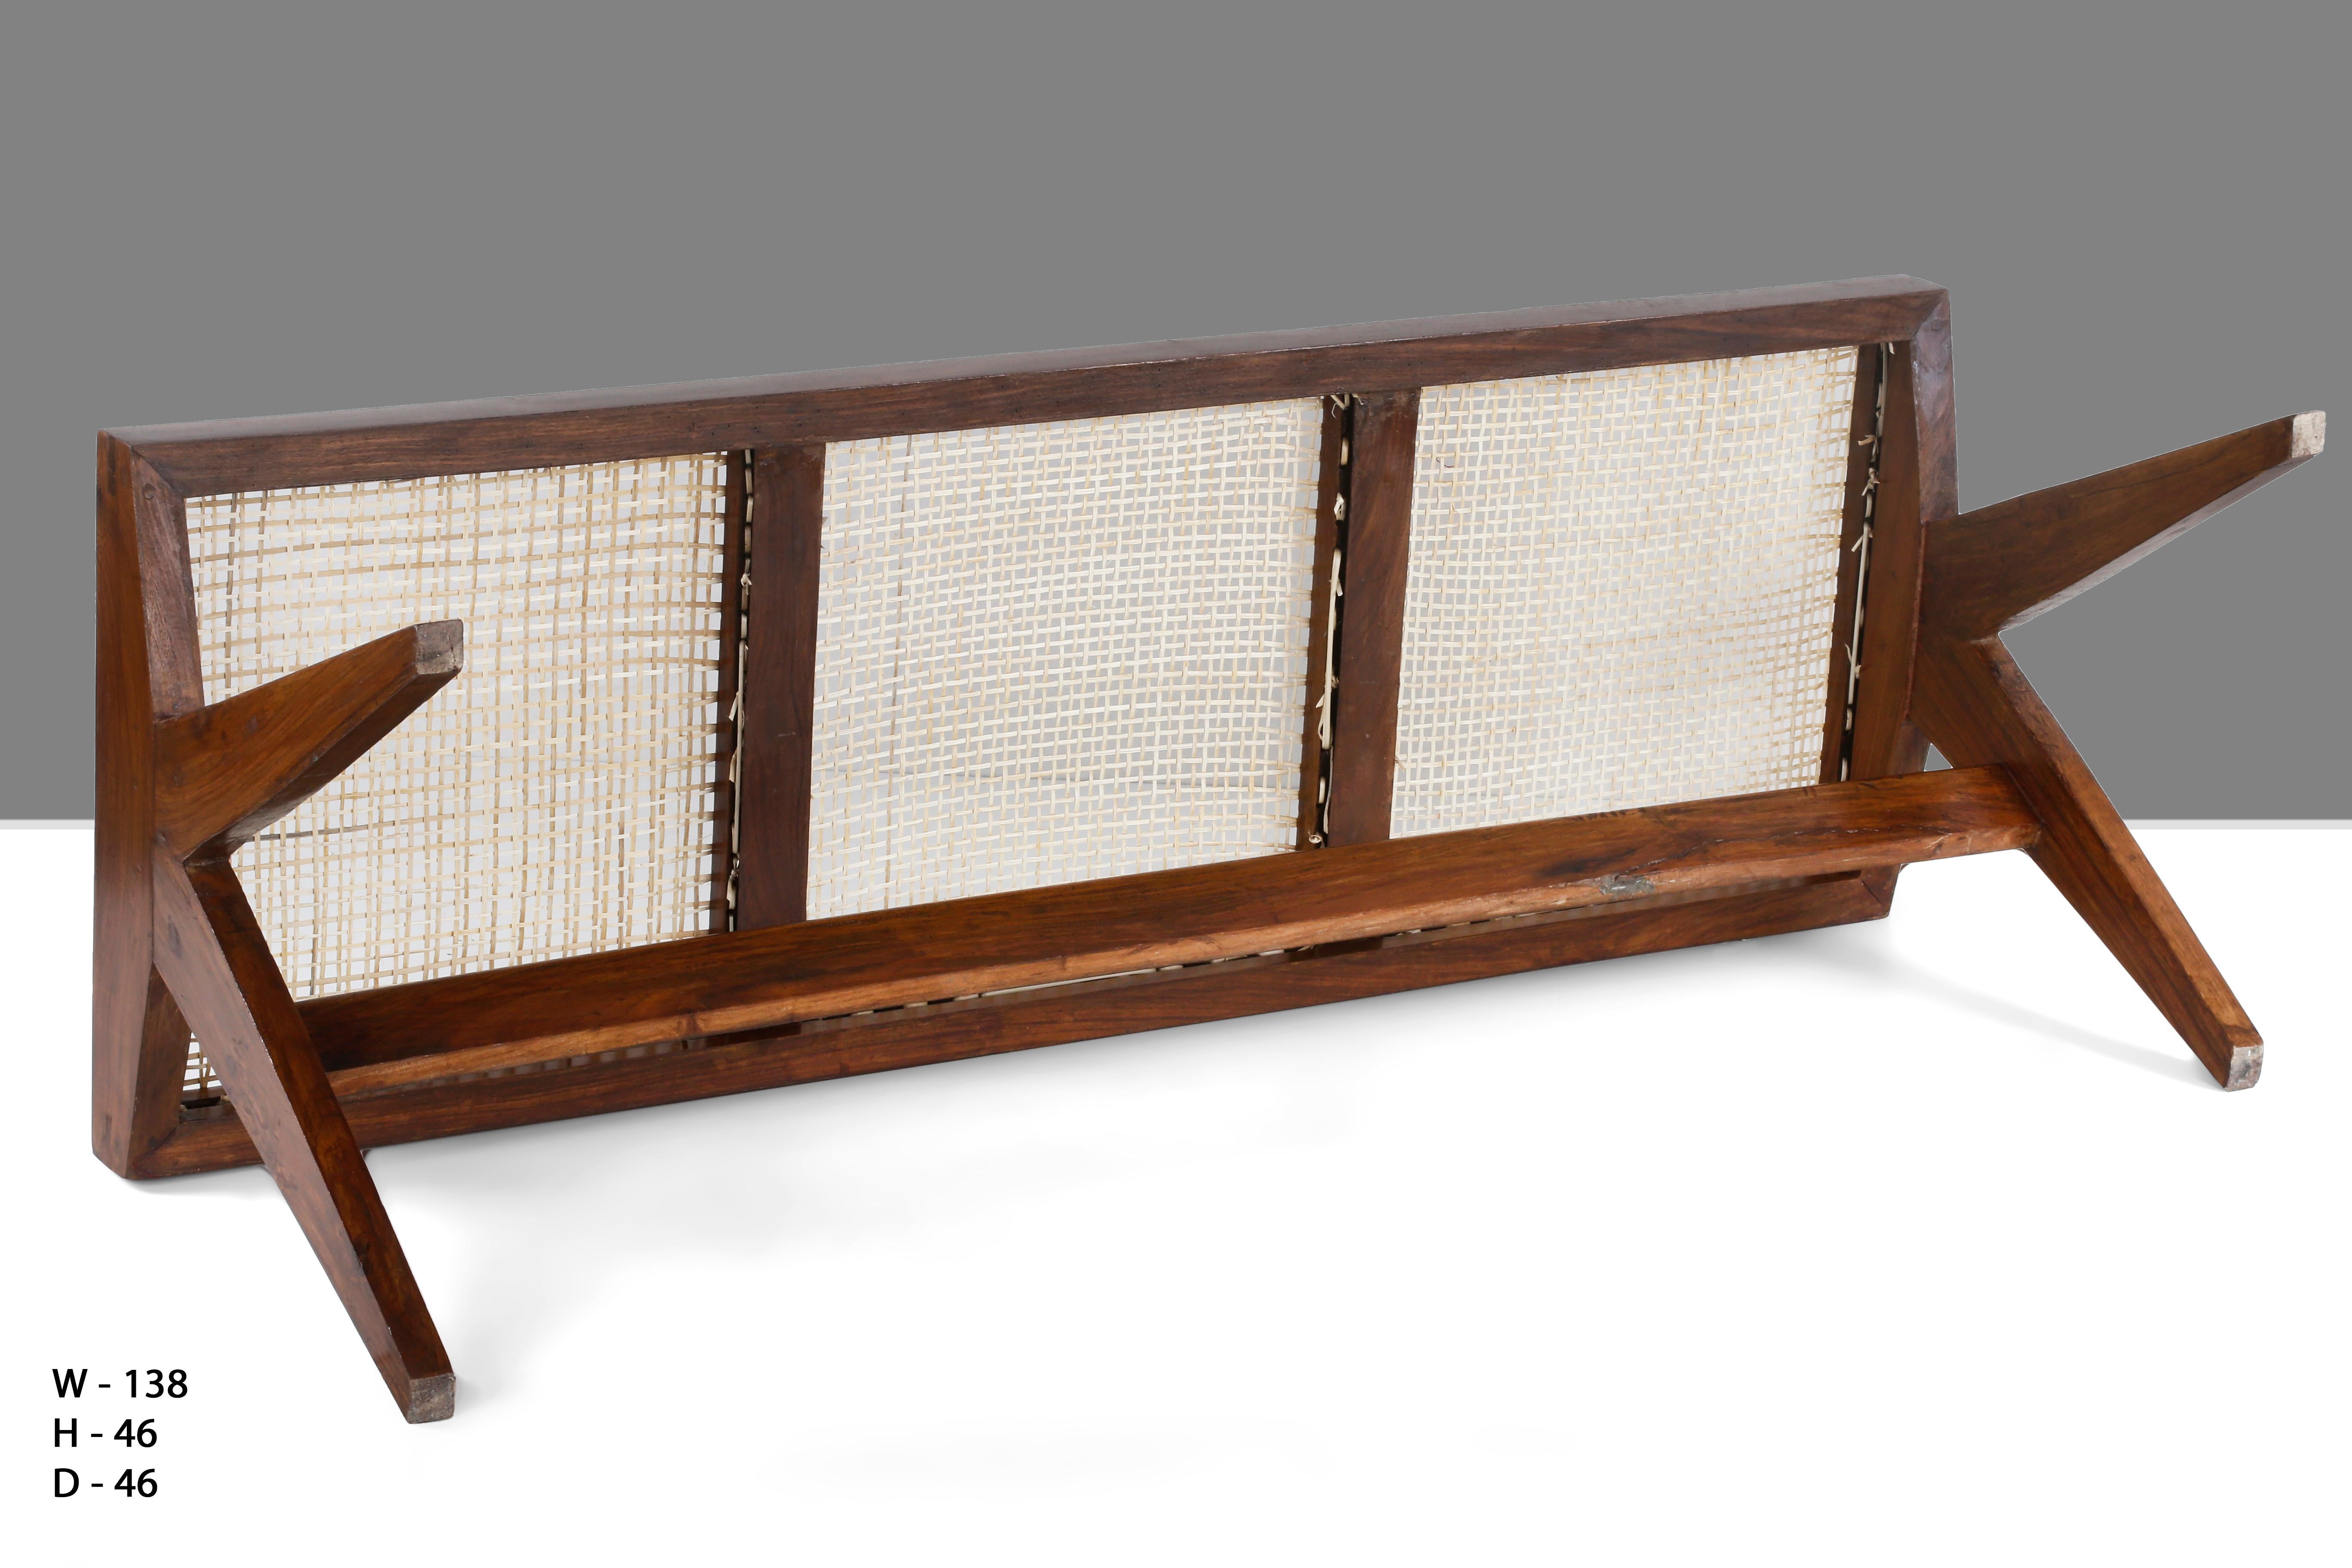 Pierre Jeanneret, Rare Chandigarh Caned Bench, PJ-SI-33-C 1